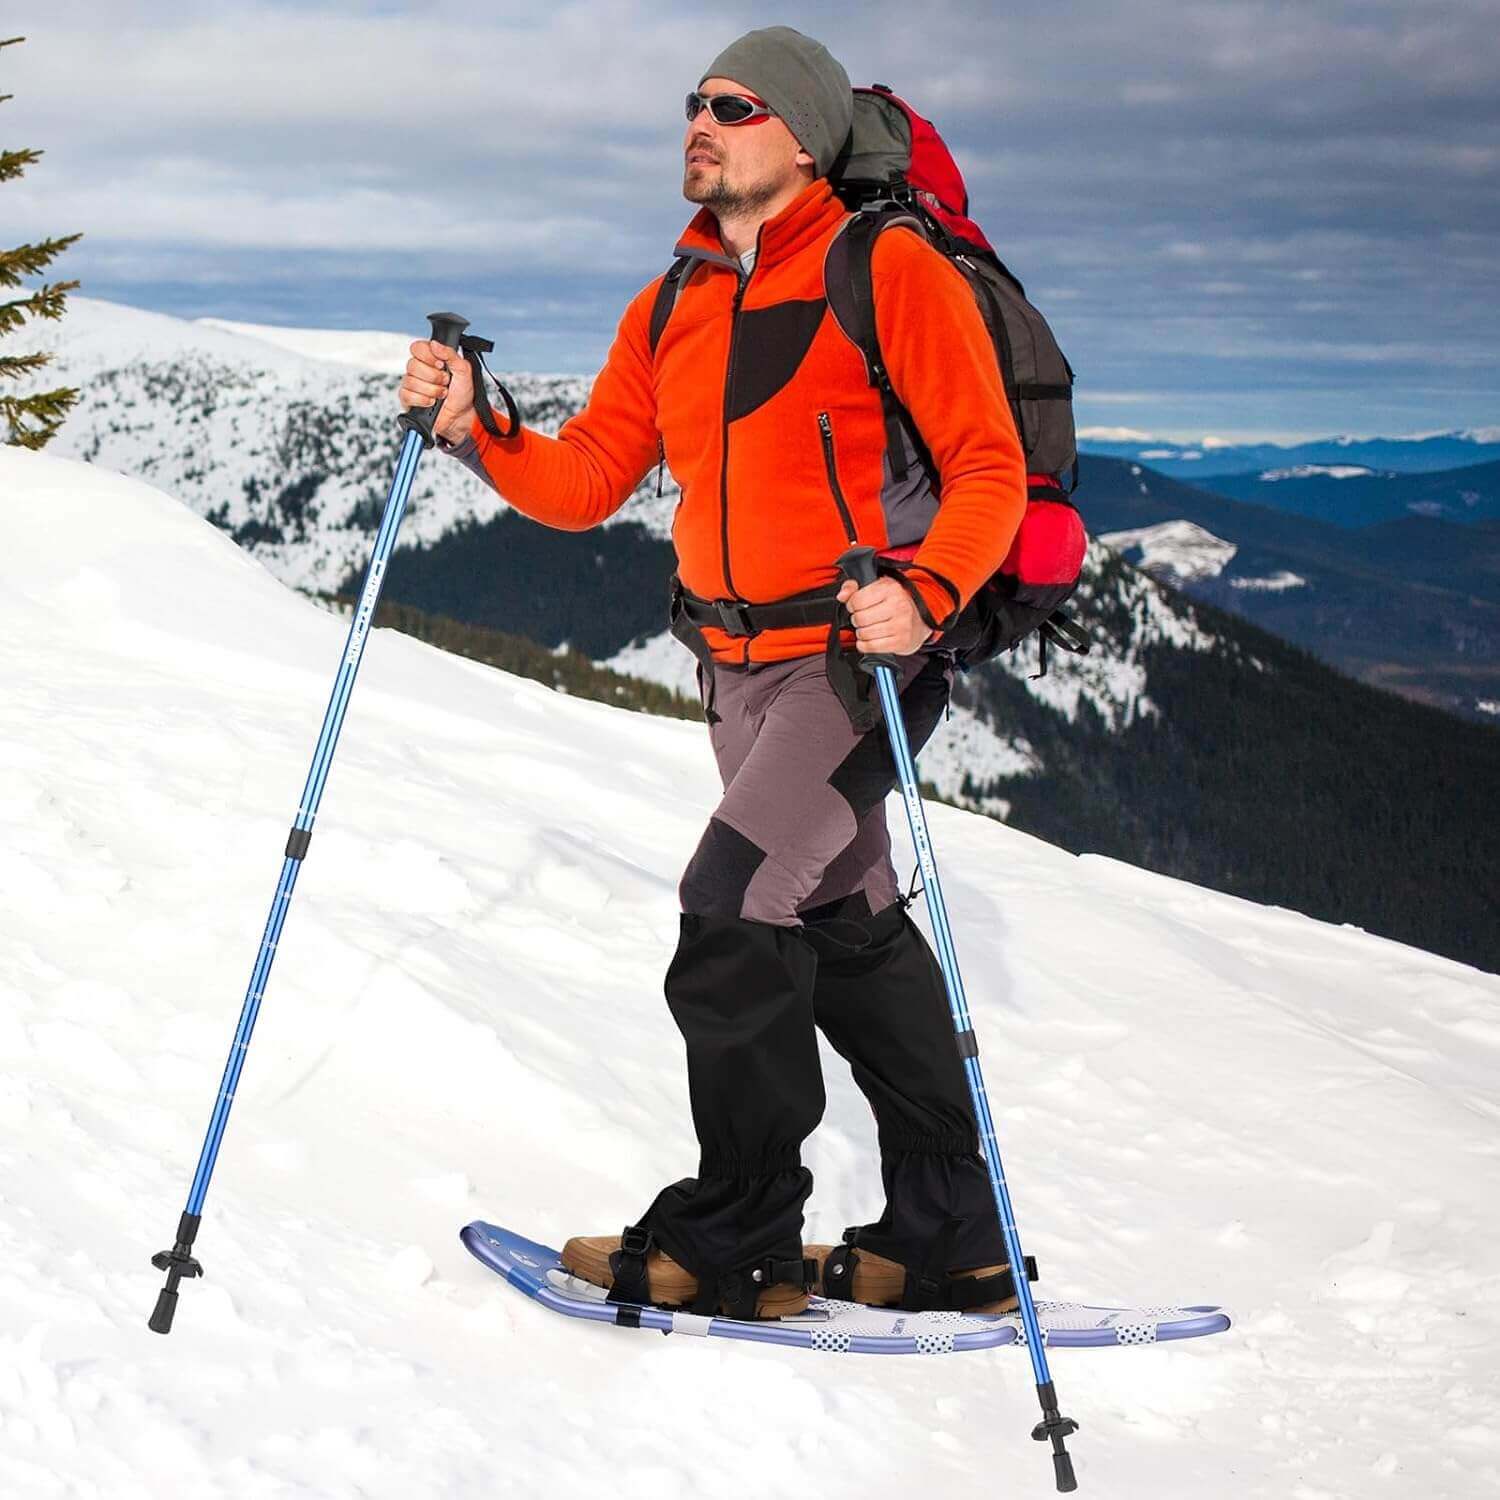 Shop The Latest >3 in 1 Light Weight Snowshoes Set with Trekking Poles > *Only $128.18*> From The Top Brand > *‎Carryownl* > Shop Now and Get Free Shipping On Orders Over $45.00 >*Shop Earth Foot*